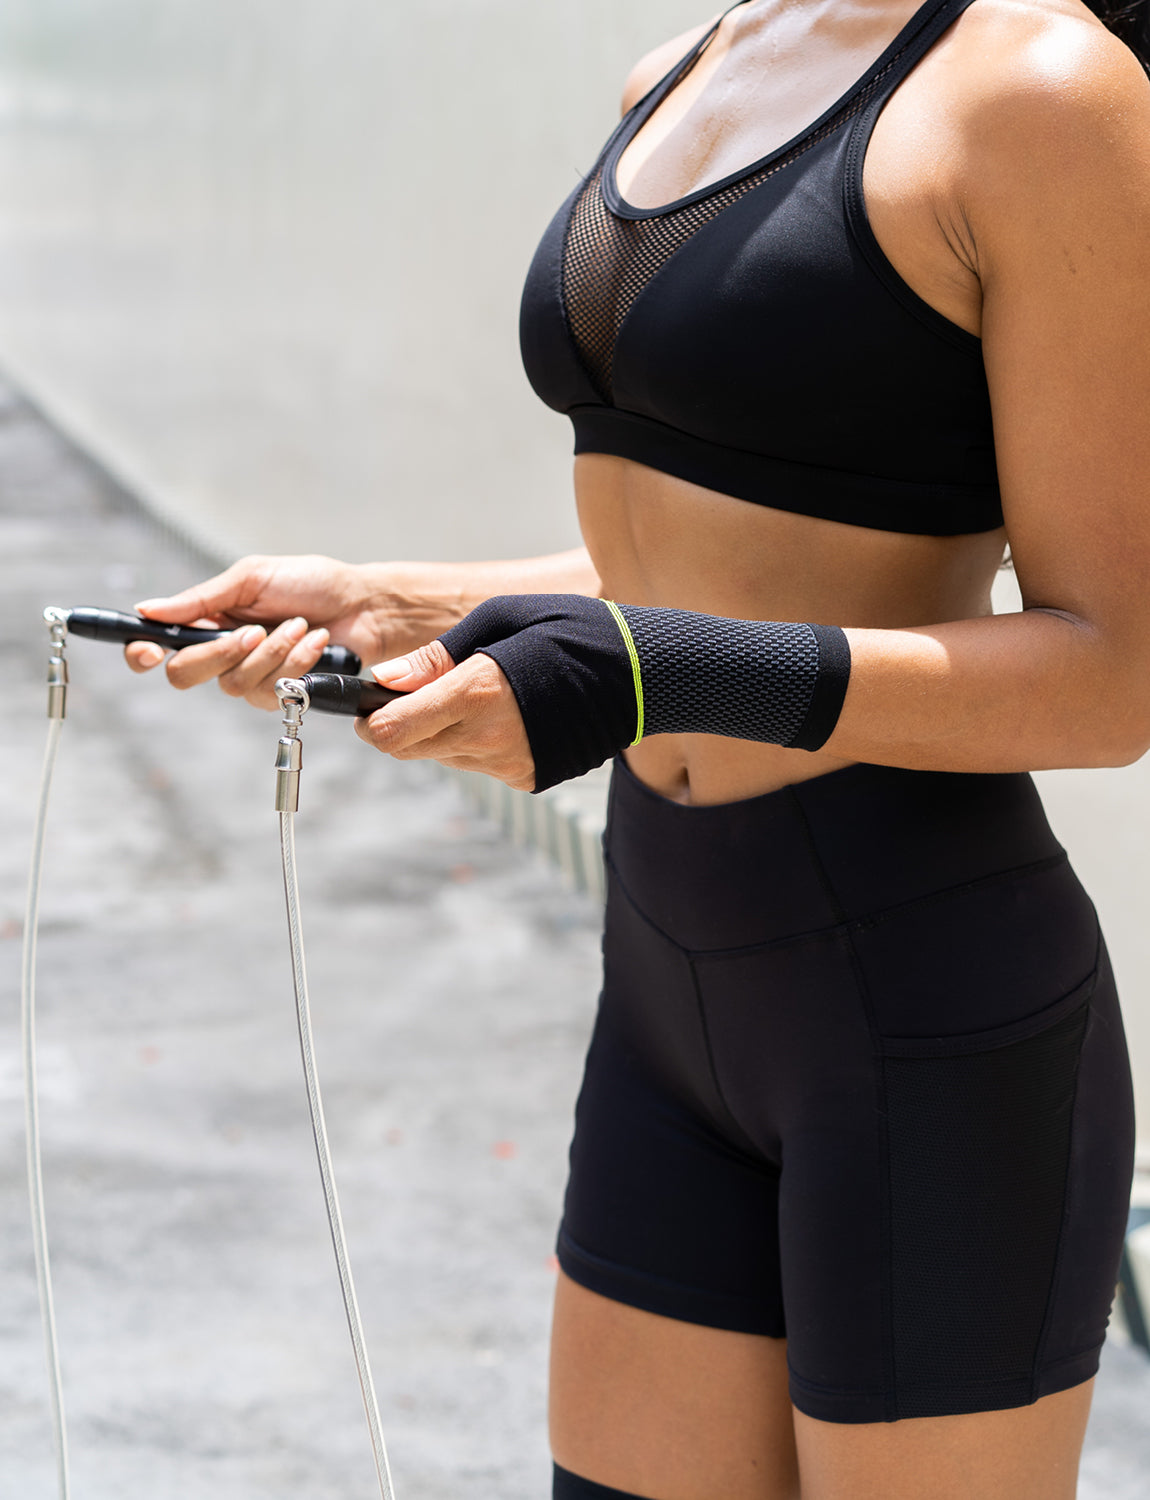 Active Wrist Support